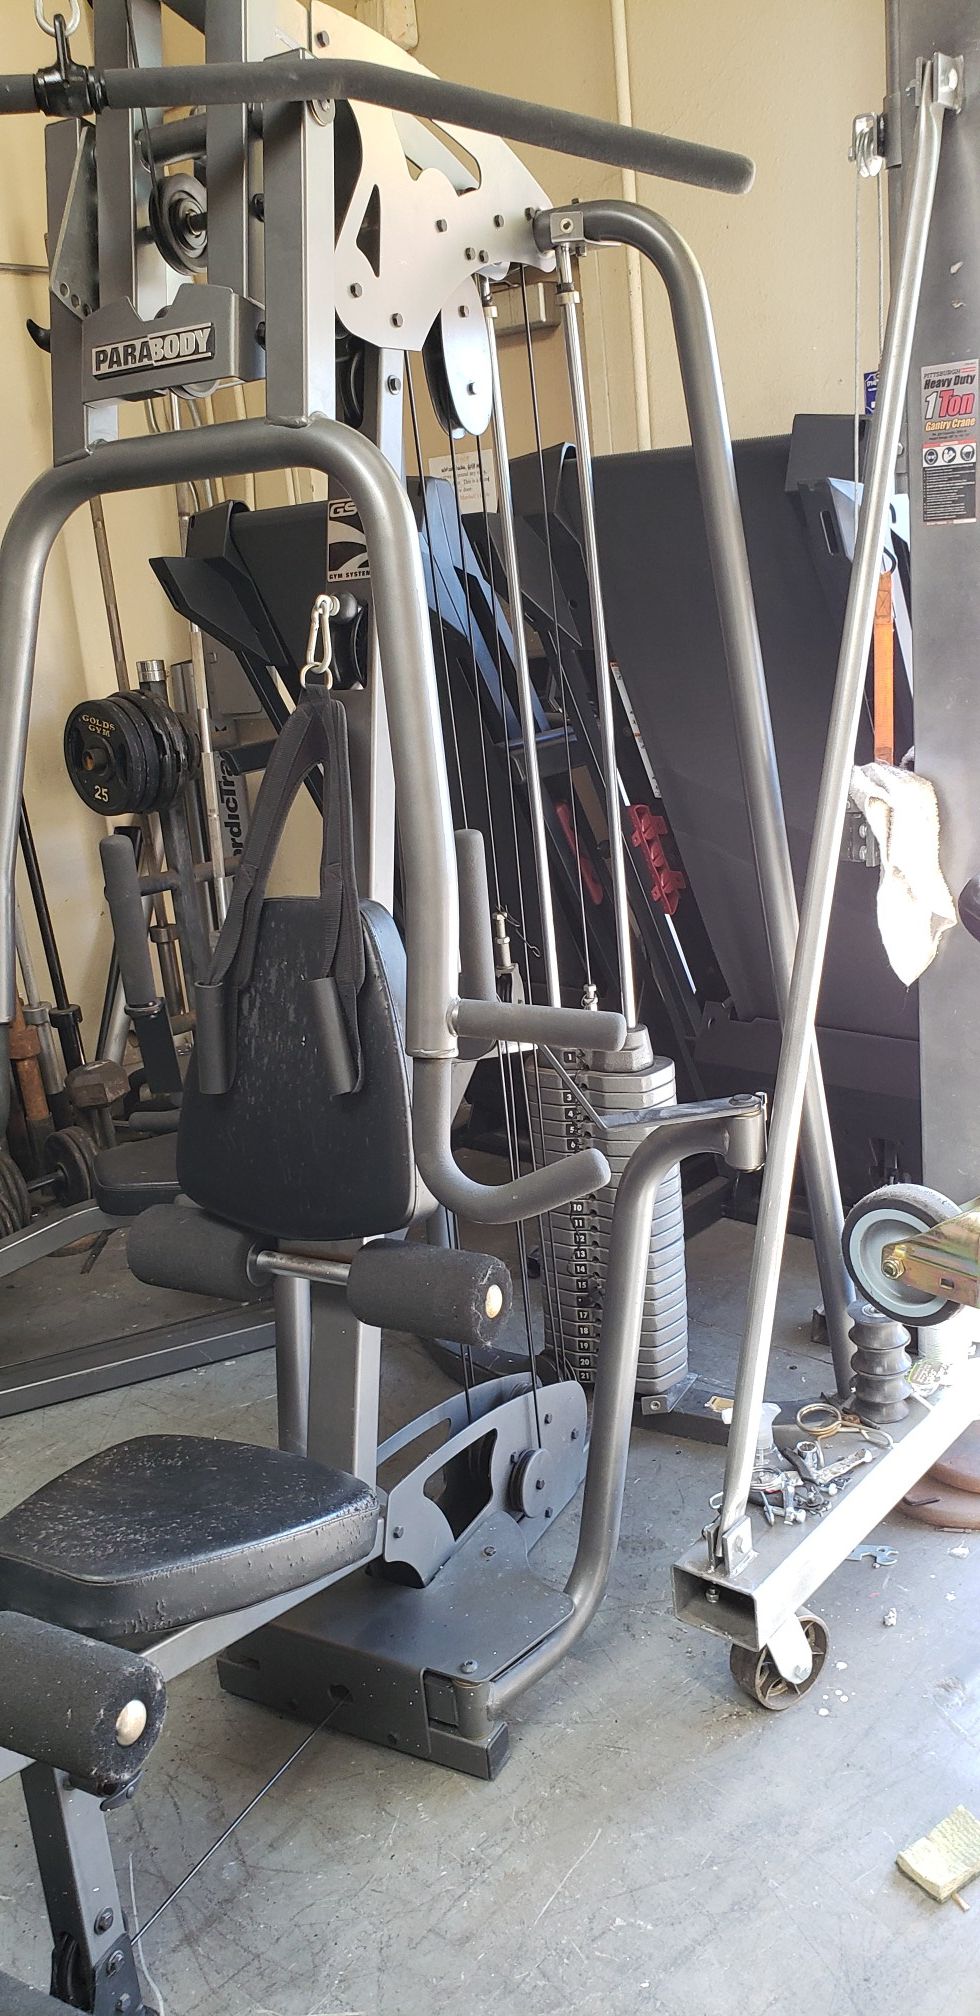 Parabody gs4 home gym with leg press for Sale in Anaheim, CA - OfferUp